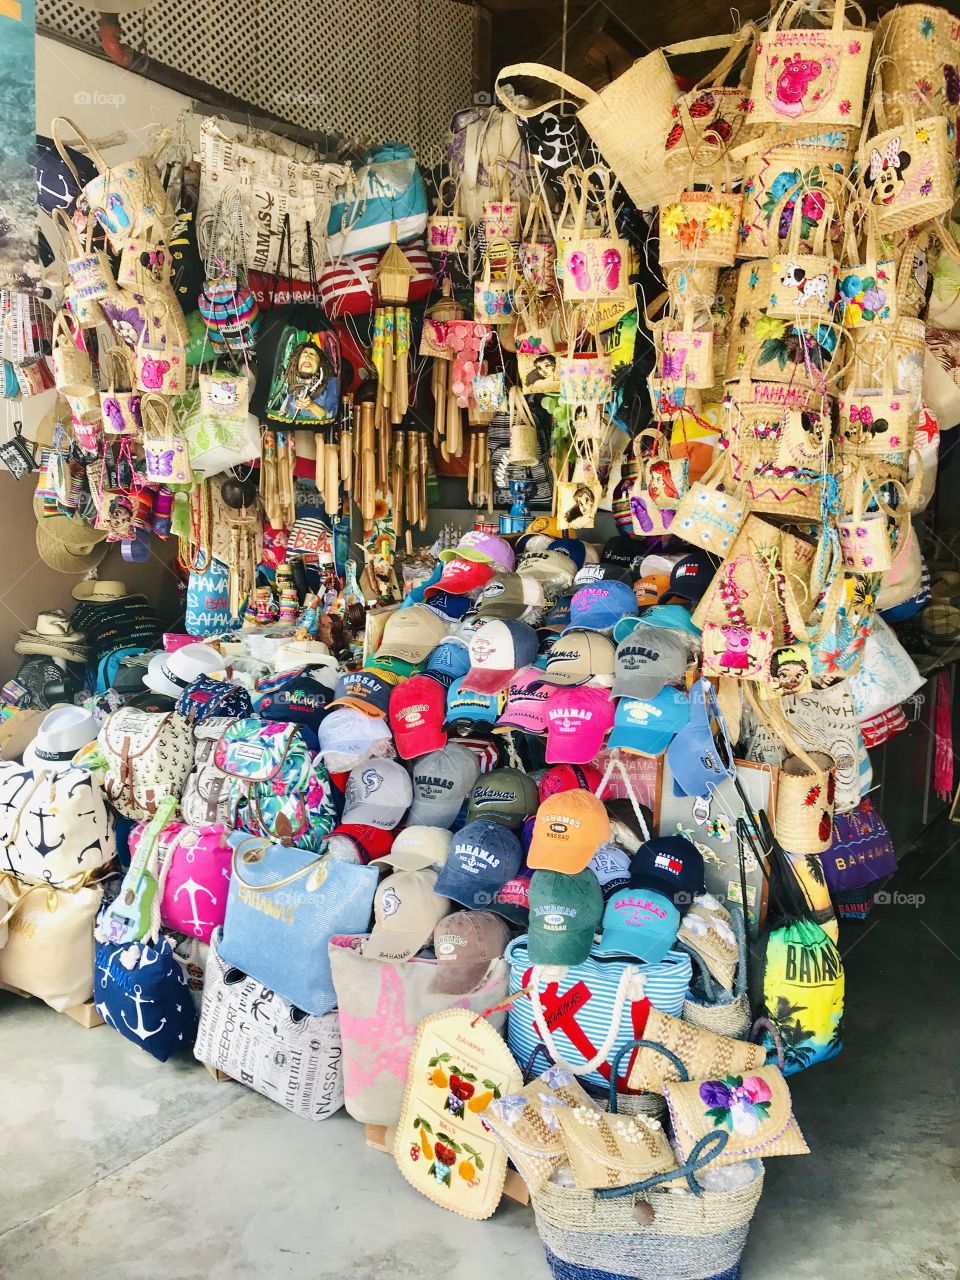 Beautiful arrangement of colors in all of this homemade merchandise at a straw market in the Eastern Caribbean! 